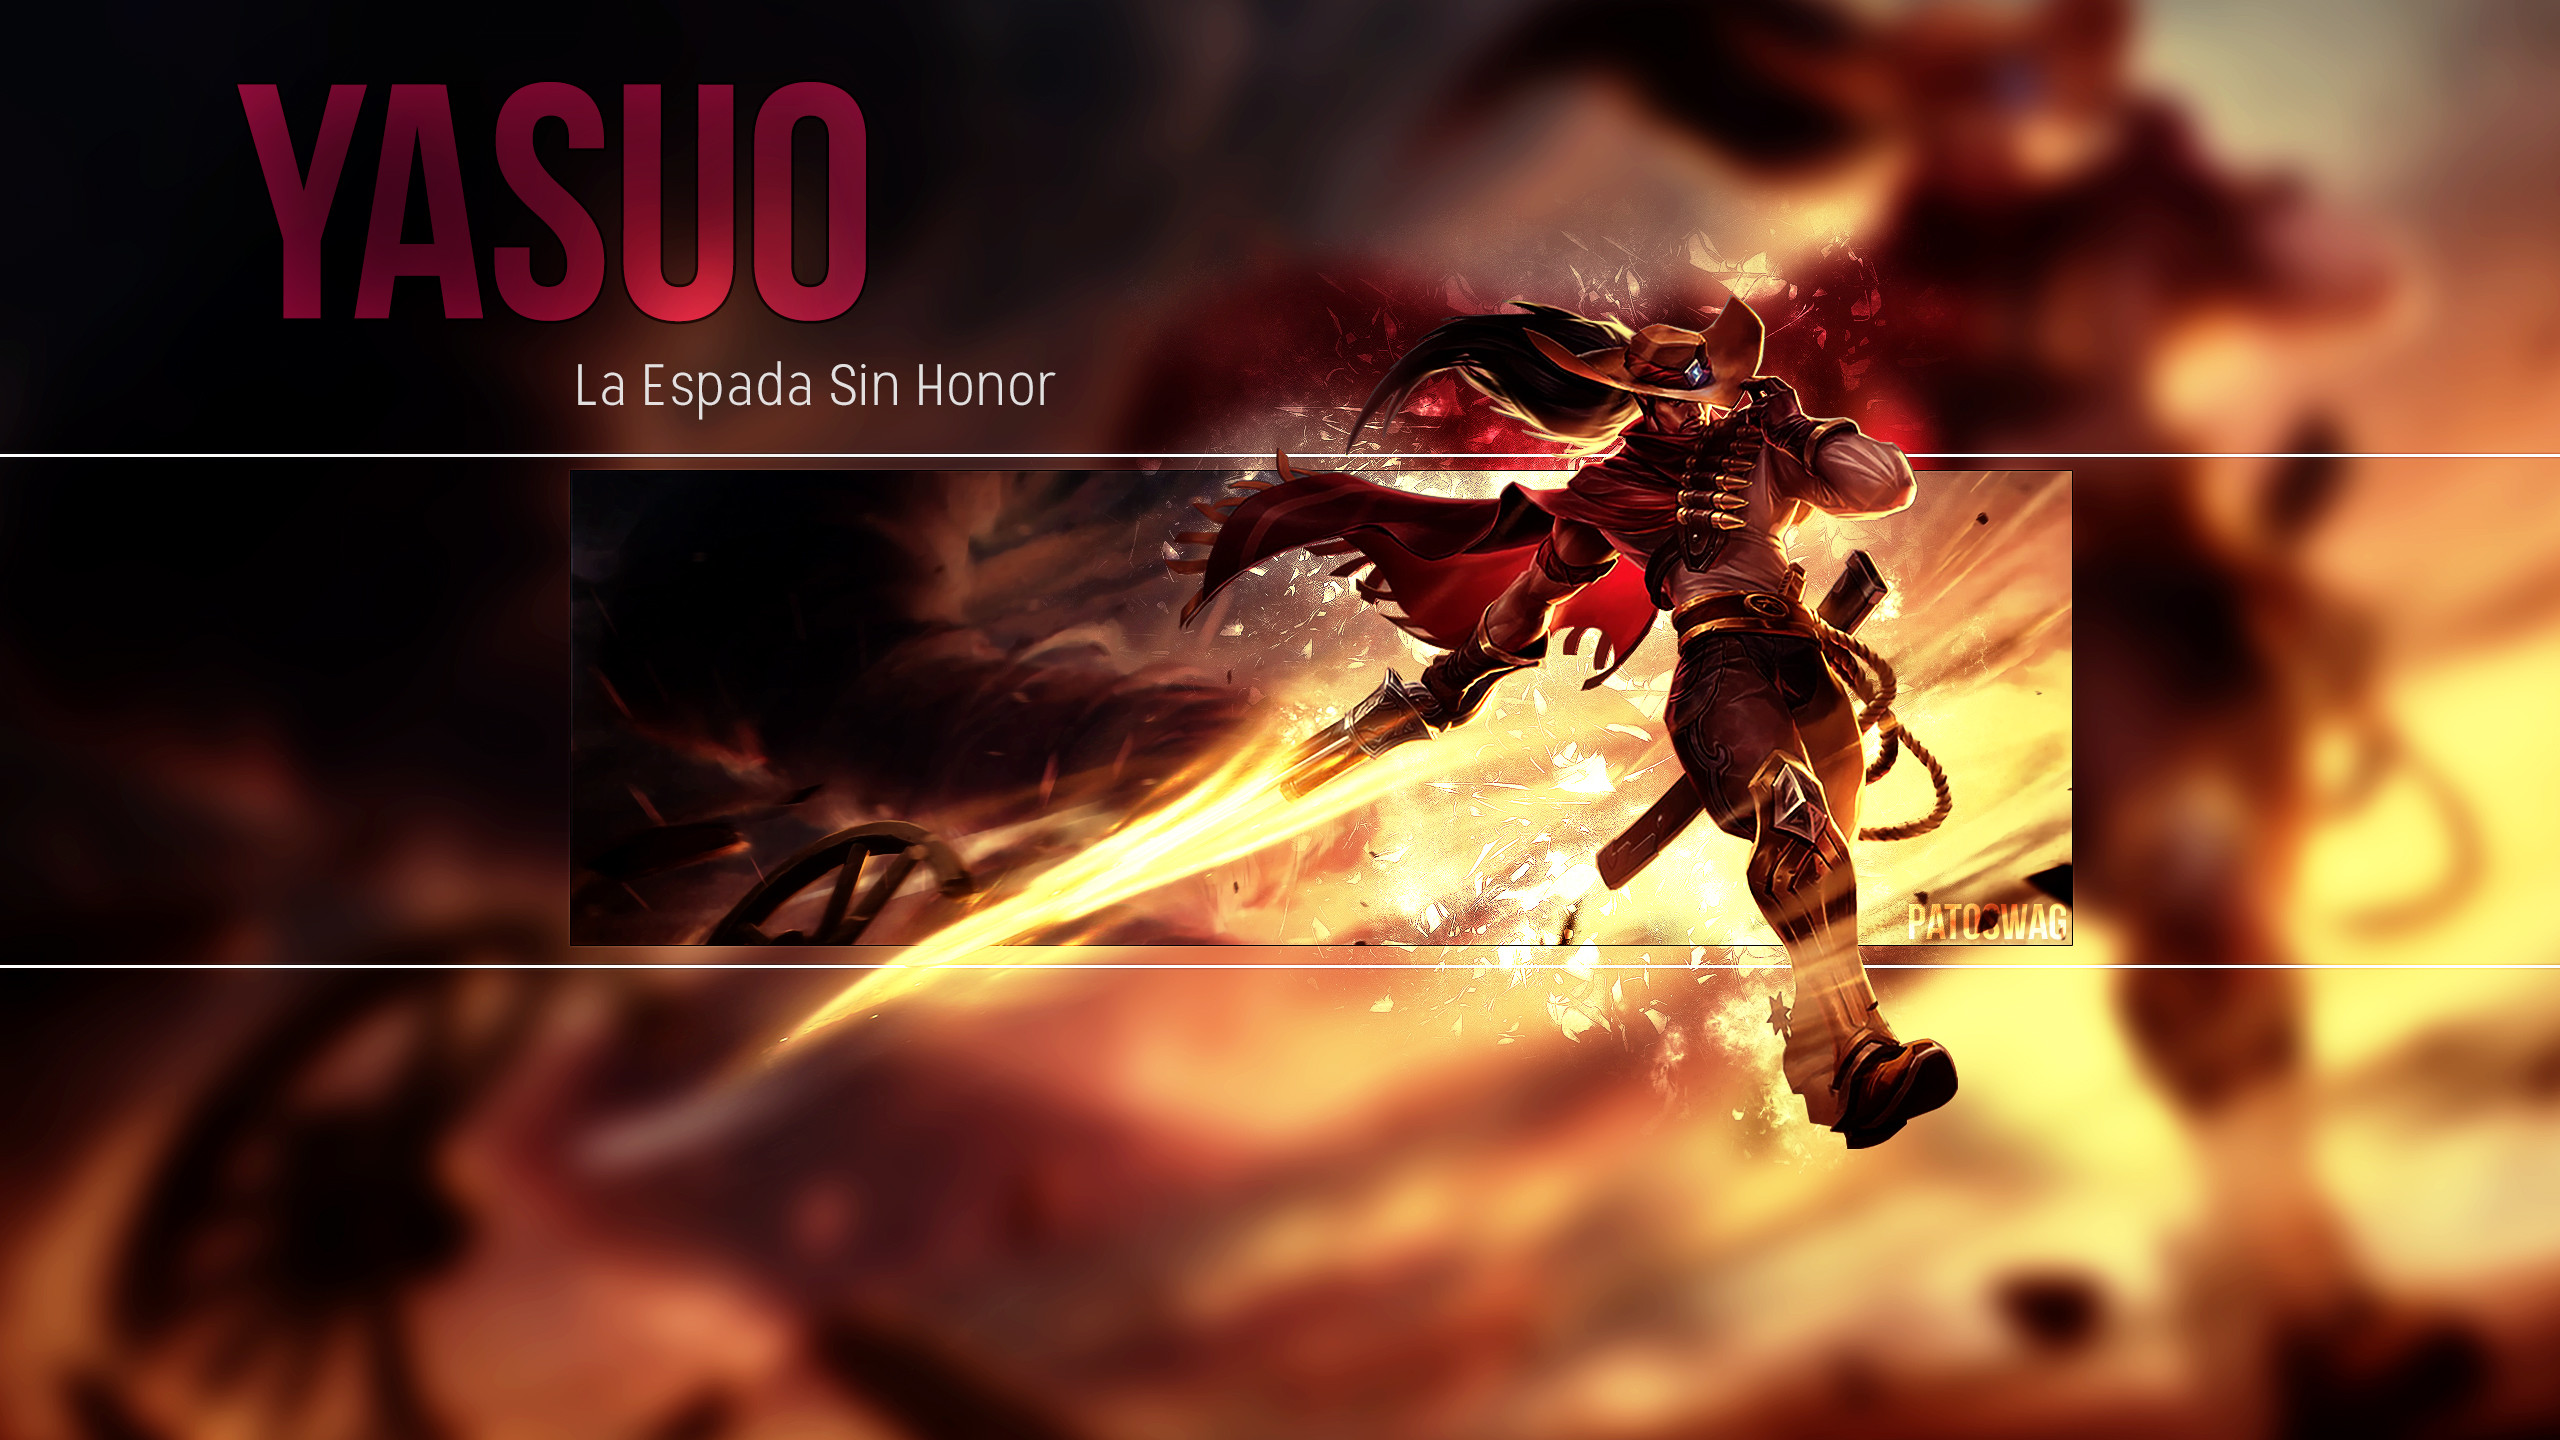 2560x1440 ... Yasuo ~ Wallpaper ~ League of Legends by PatoSwag